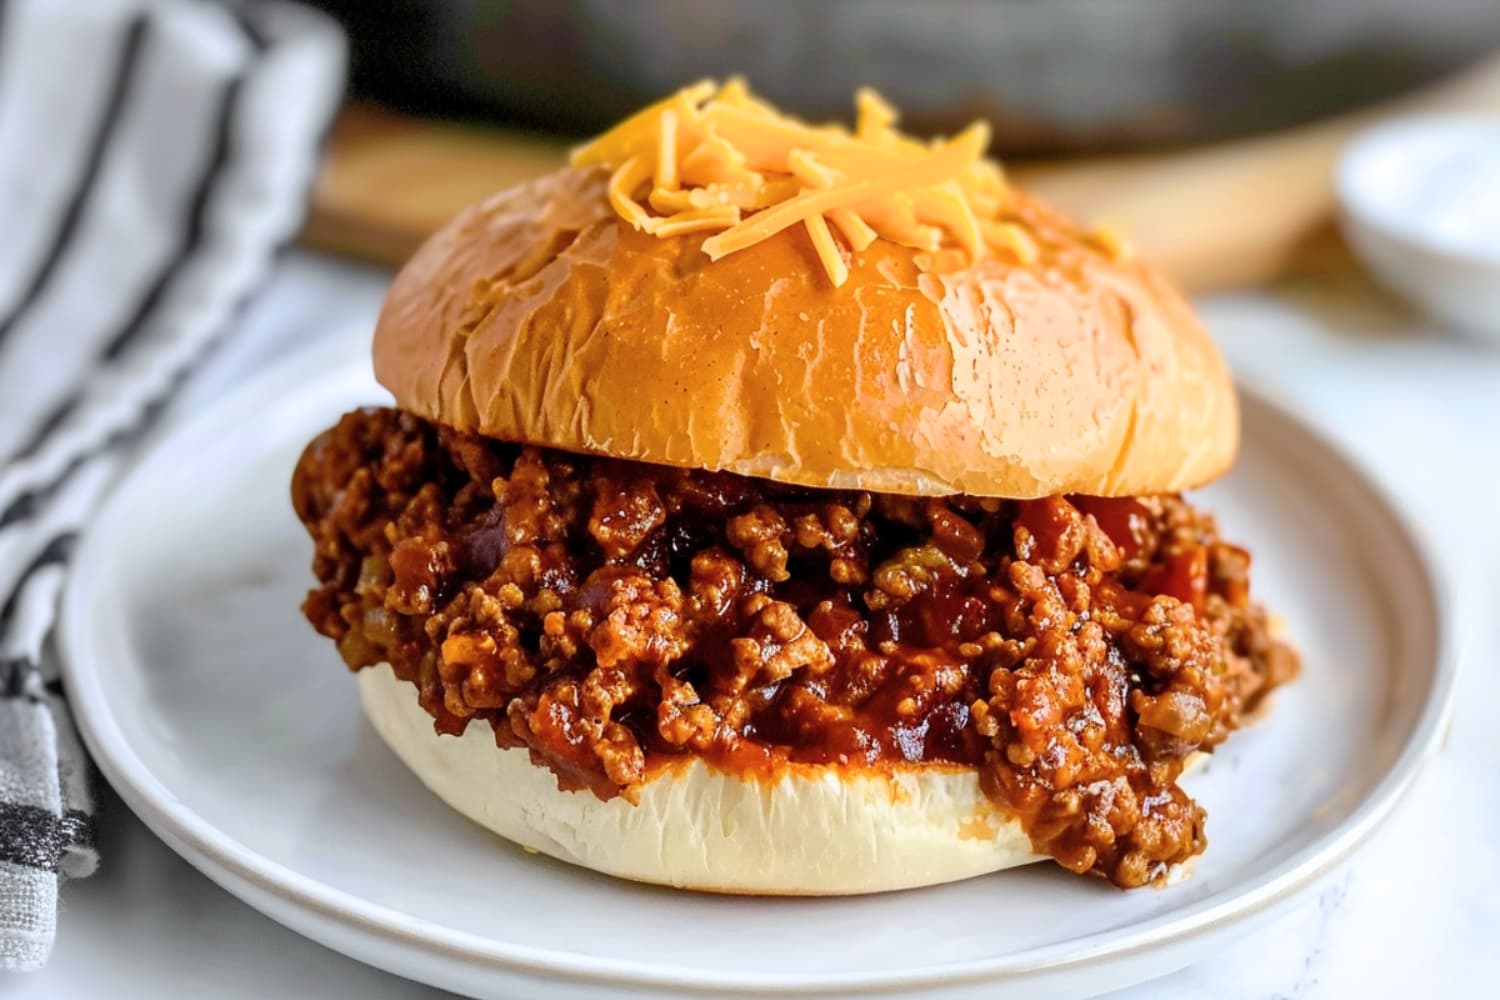 Homemade saucy and juicy barbecue sloppy joes with green bell peppers and onions